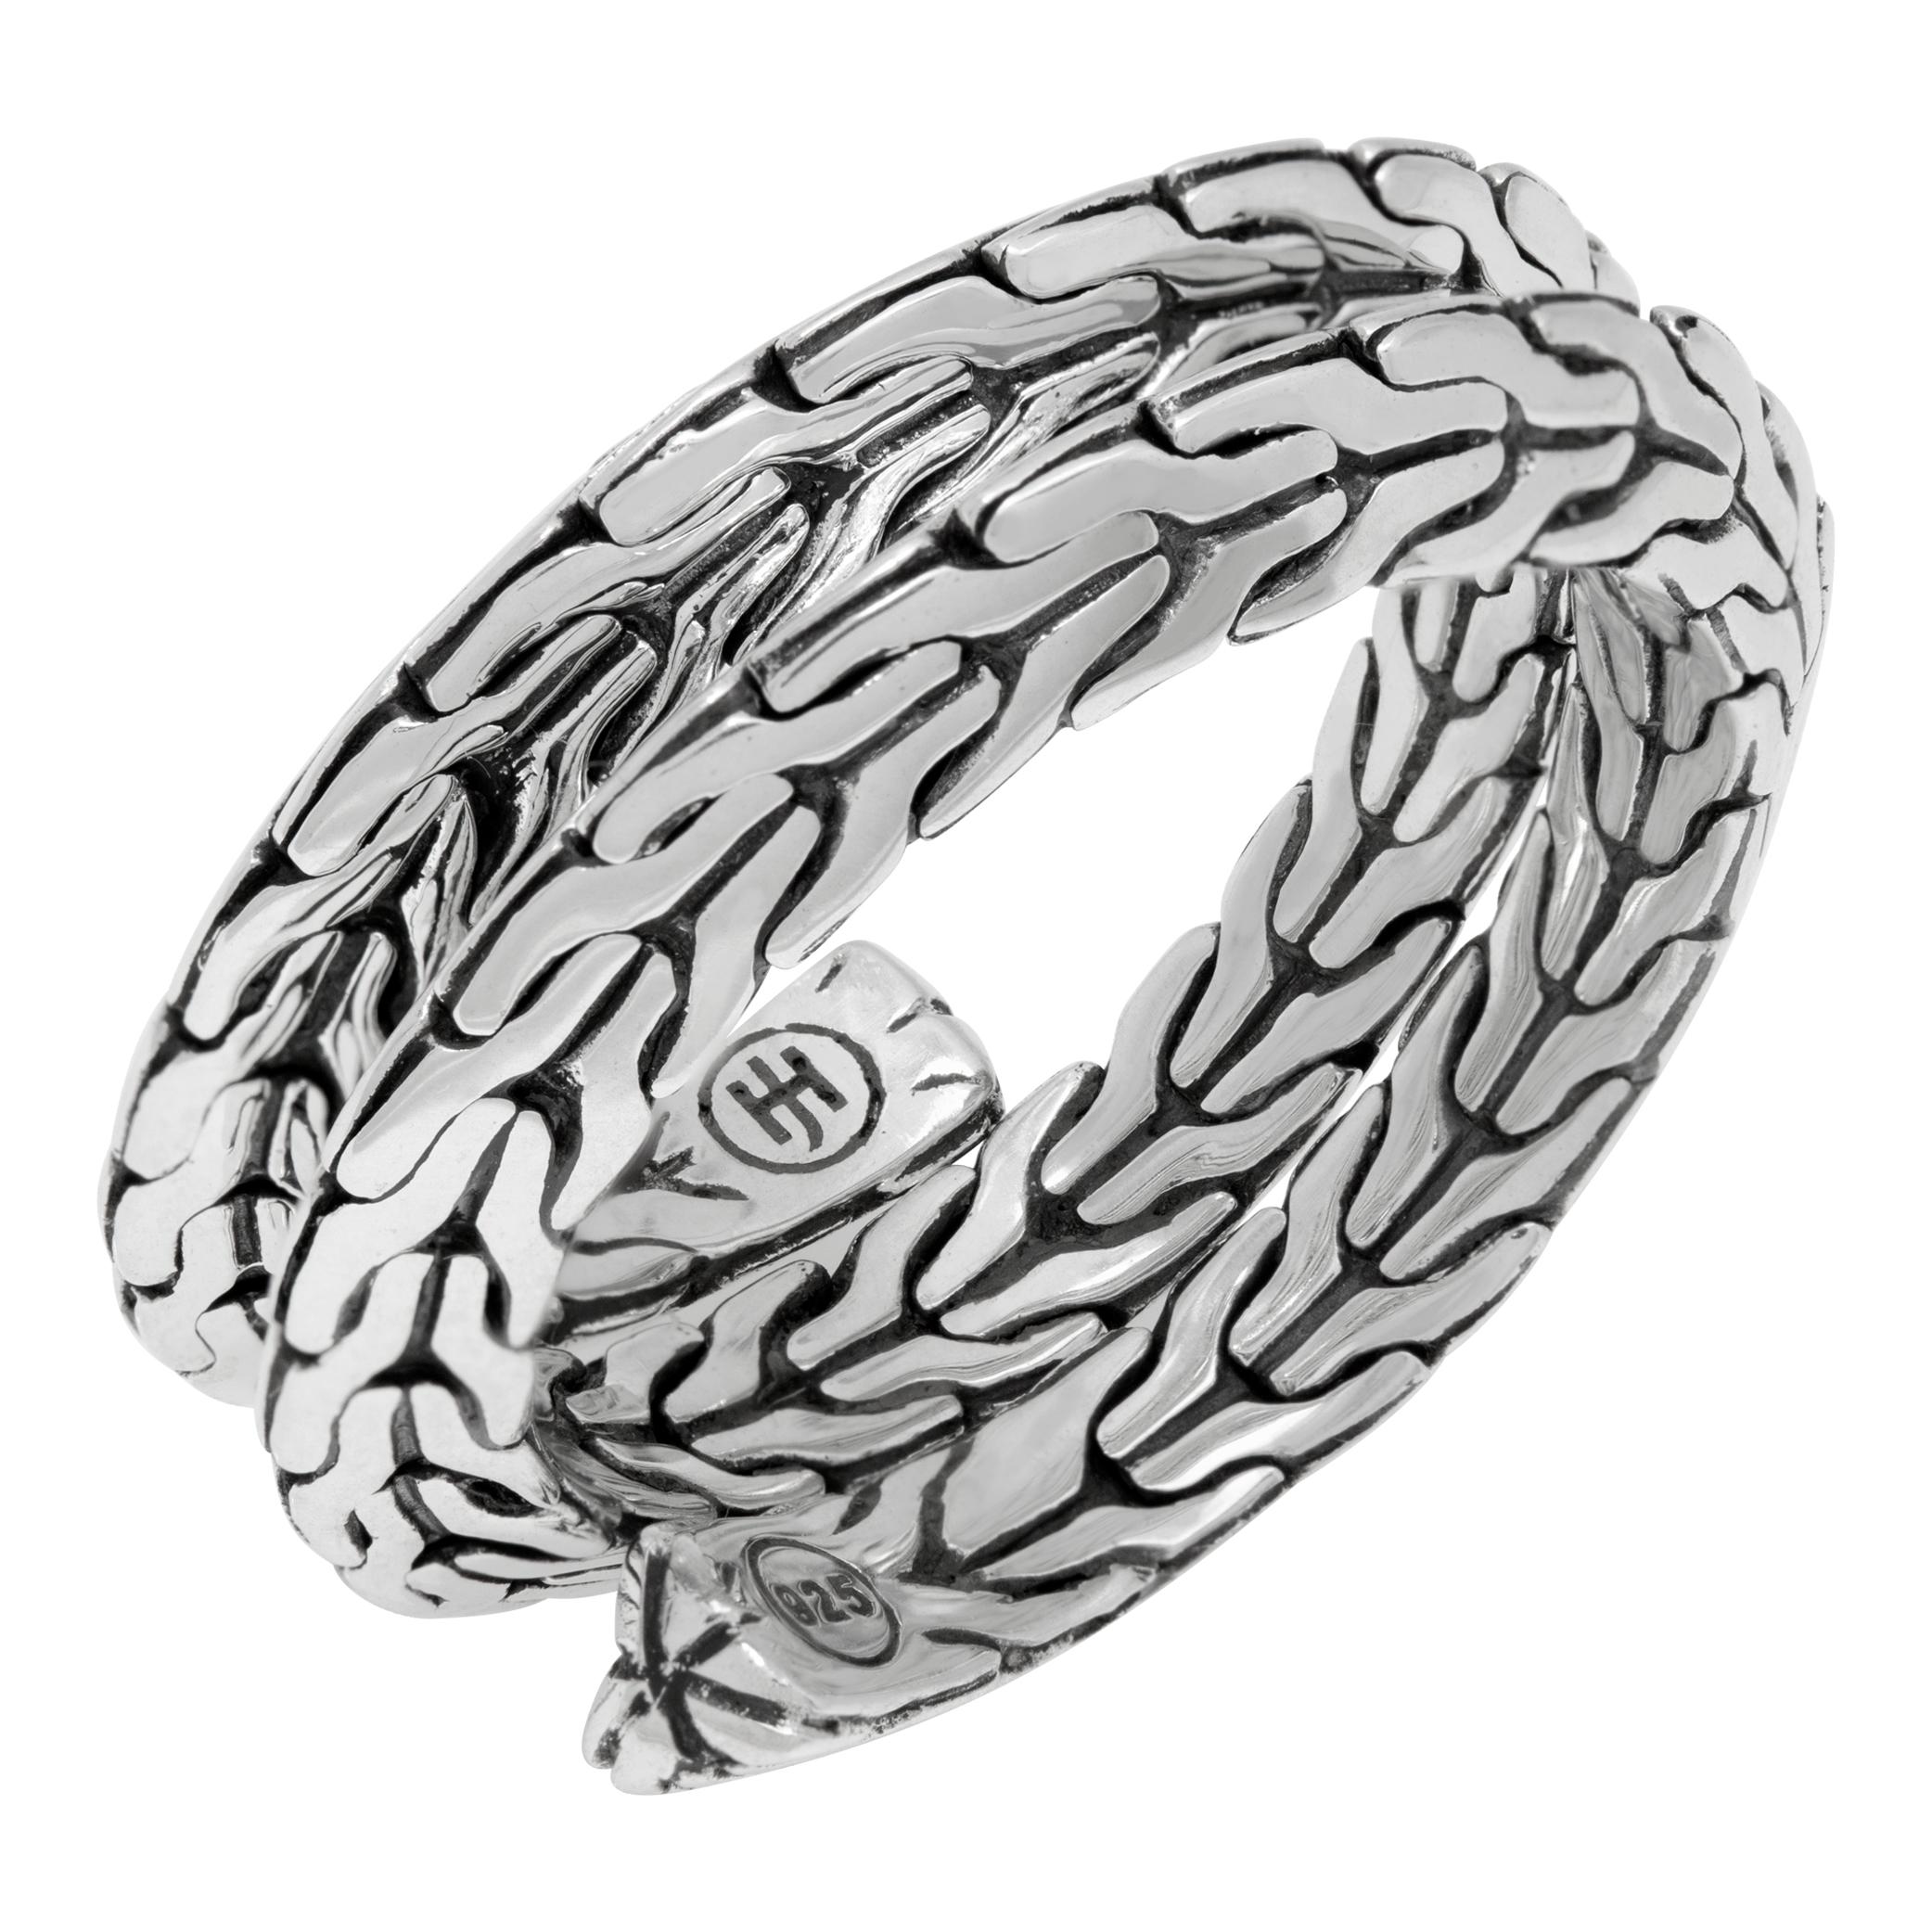 John Hardy Tiga double coil ring in sterling silver. Size 8

This John Hardy ring is currently size 8 and some items can be sized up or down, please ask! is Sterling Silver.